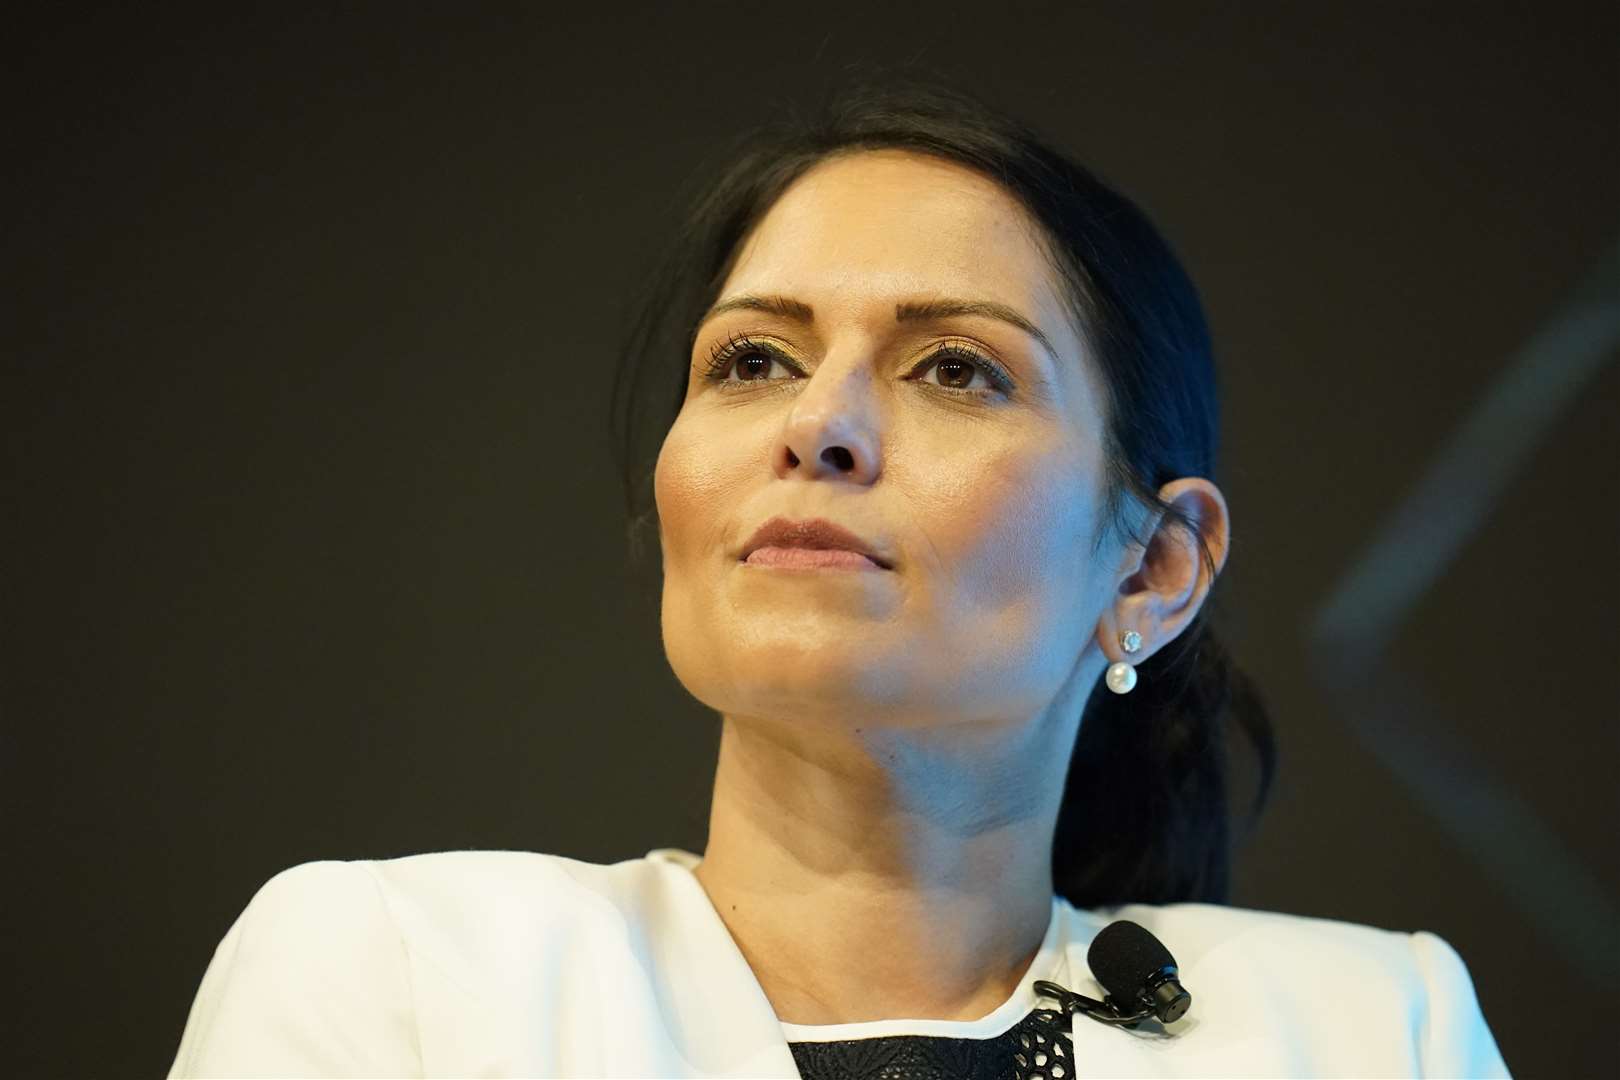 Priti Patel vowed to crack down on foreign interference while she was Home Secretary (Danny Lawson/PA)